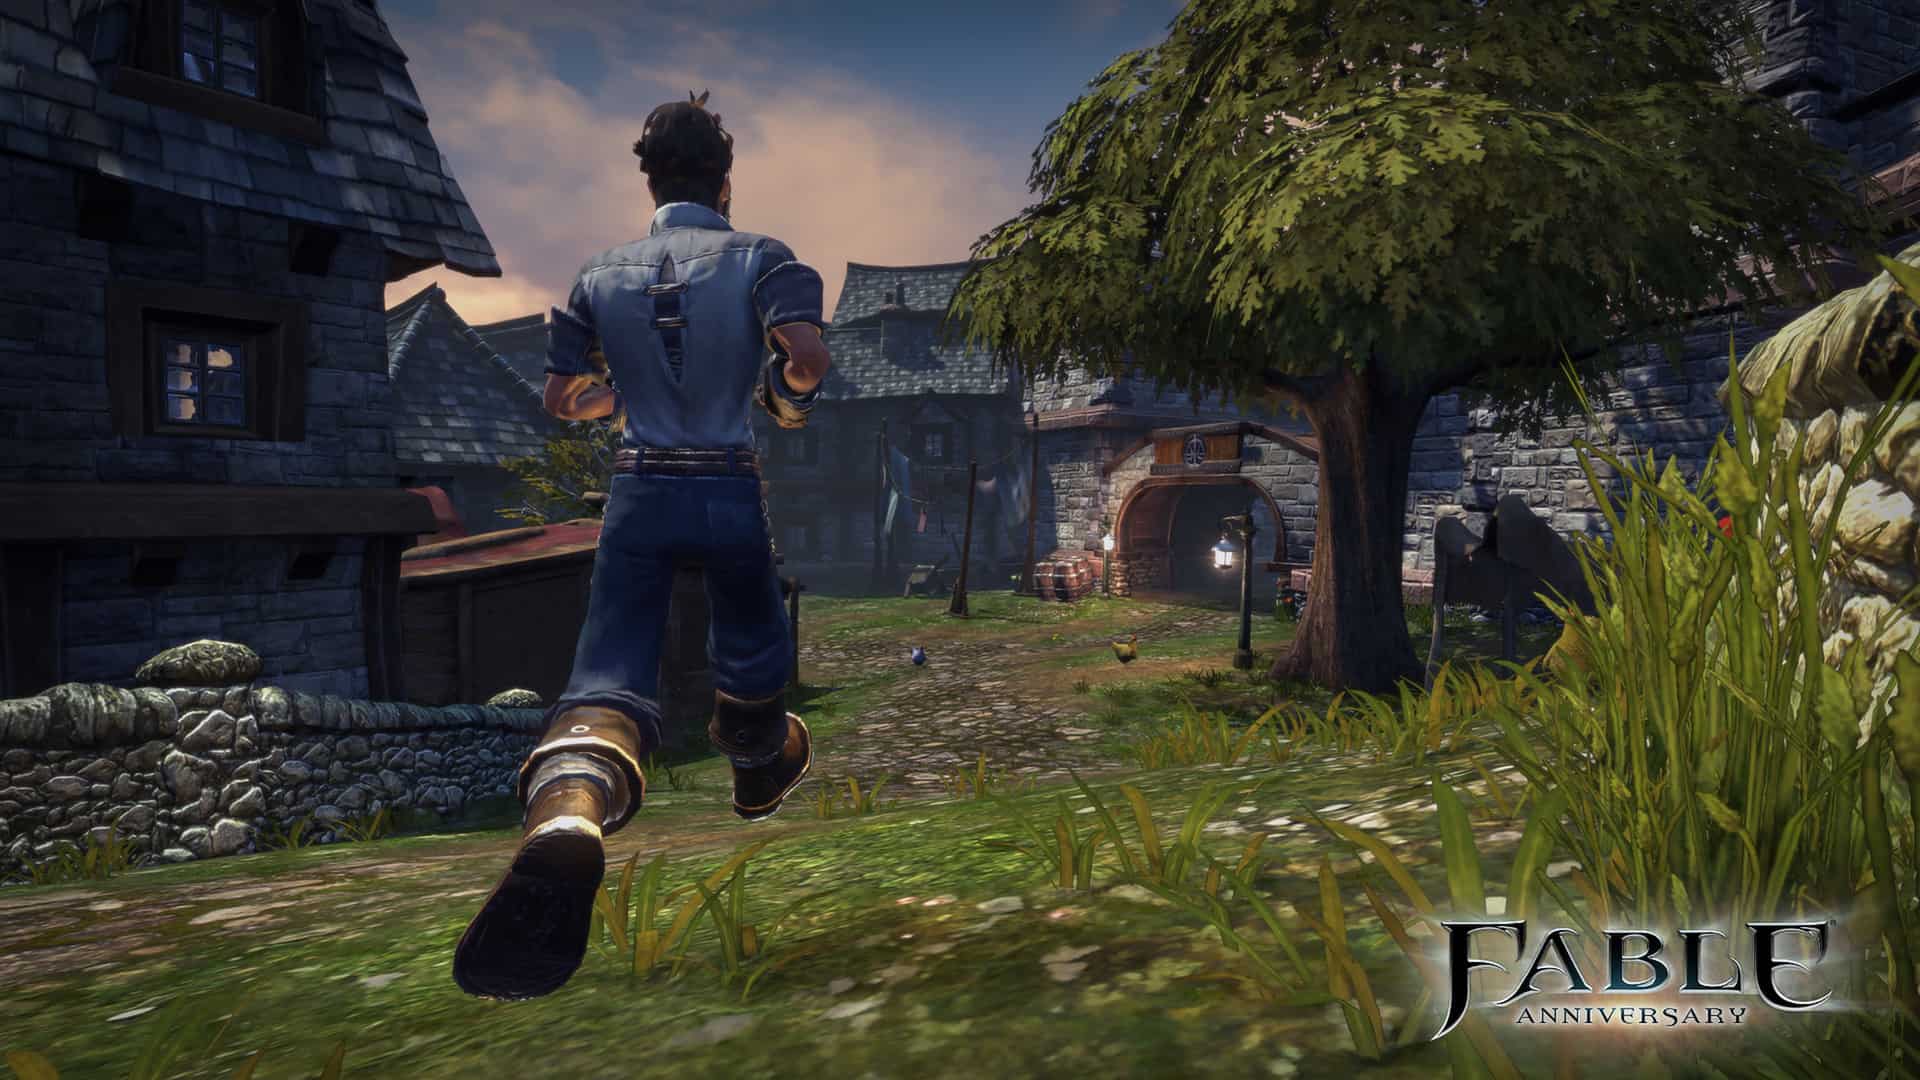 A Steam promotional image for Fable Anniversary.